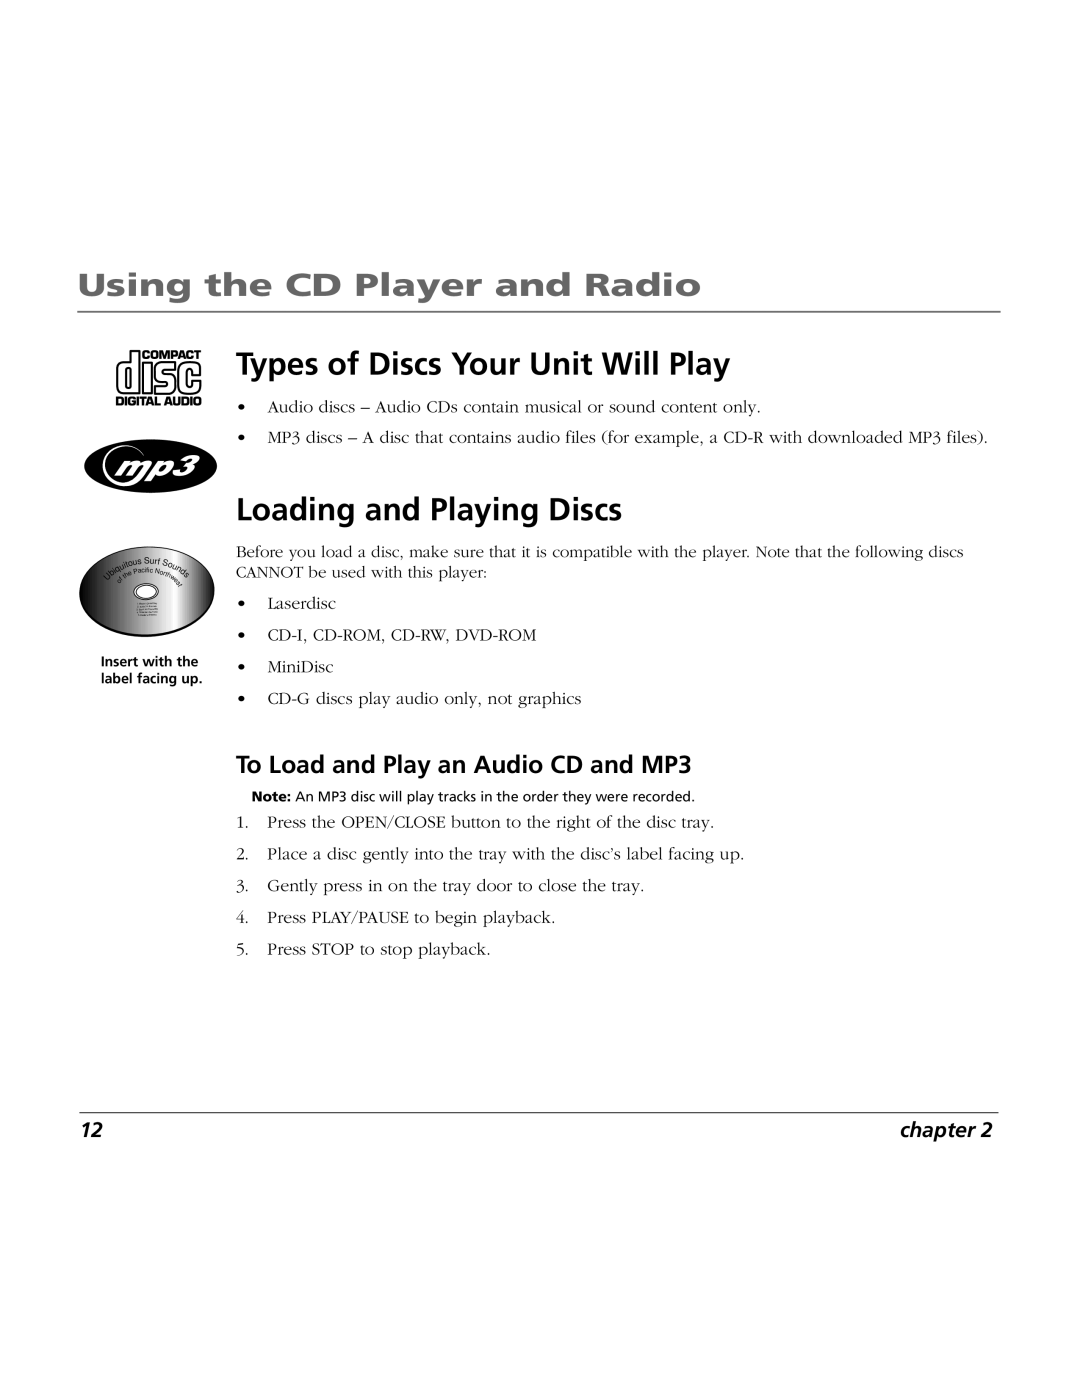 RCA BLC524 Using the CD Player and Radio, Types of Discs Your Unit Will Play, Loading and Playing Discs, chapter 